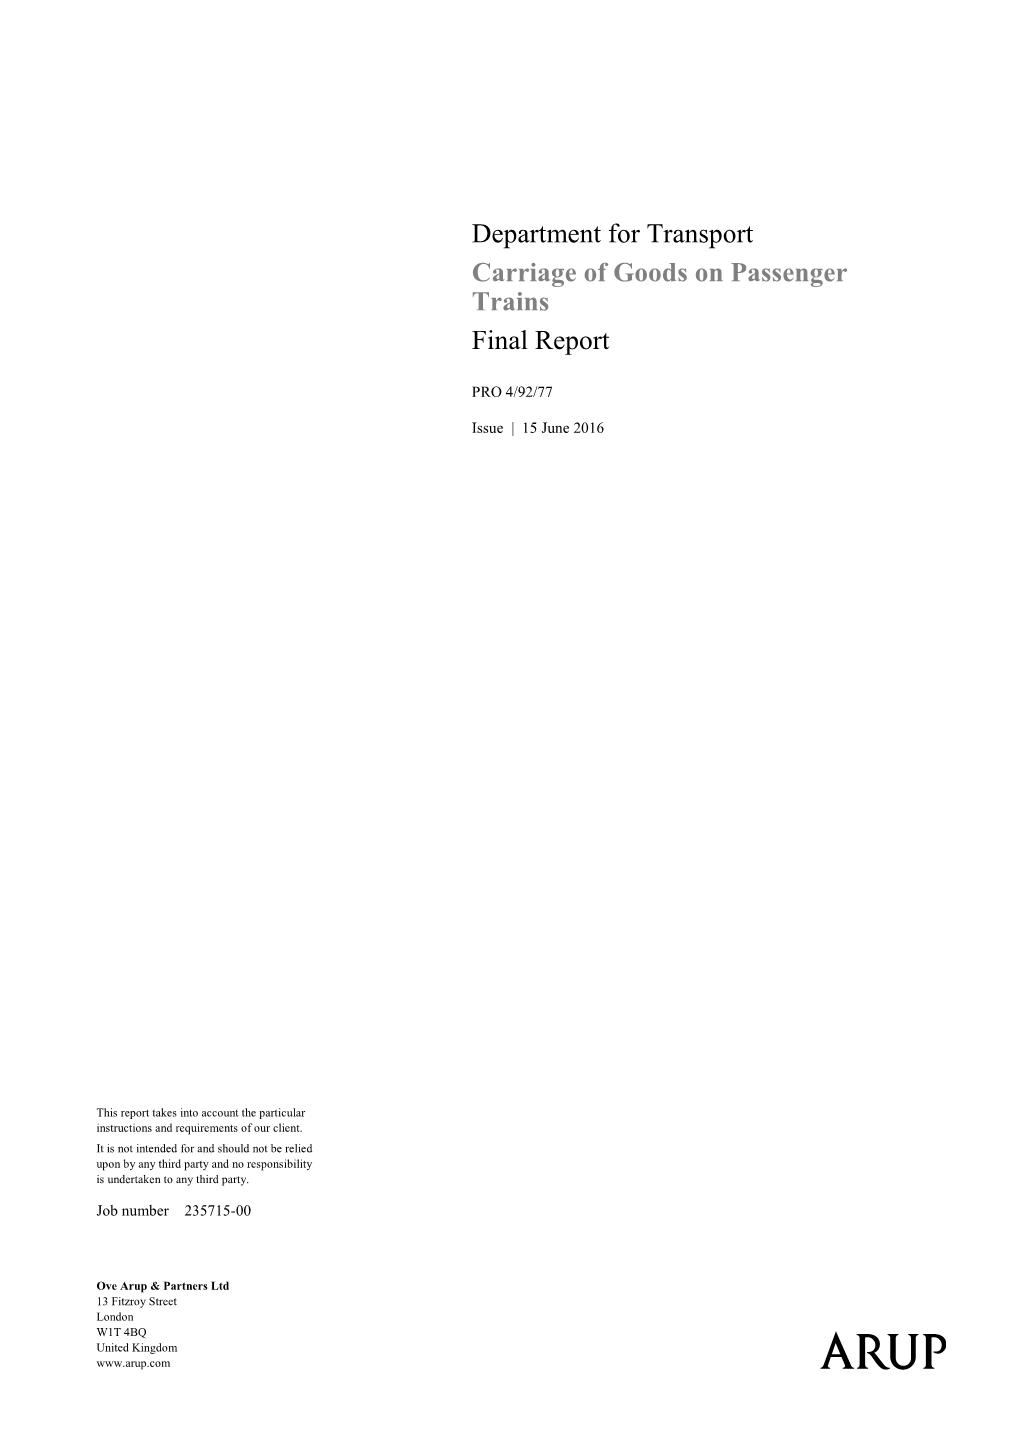 Department for Transport Carriage of Goods on Passenger Trains Final Report